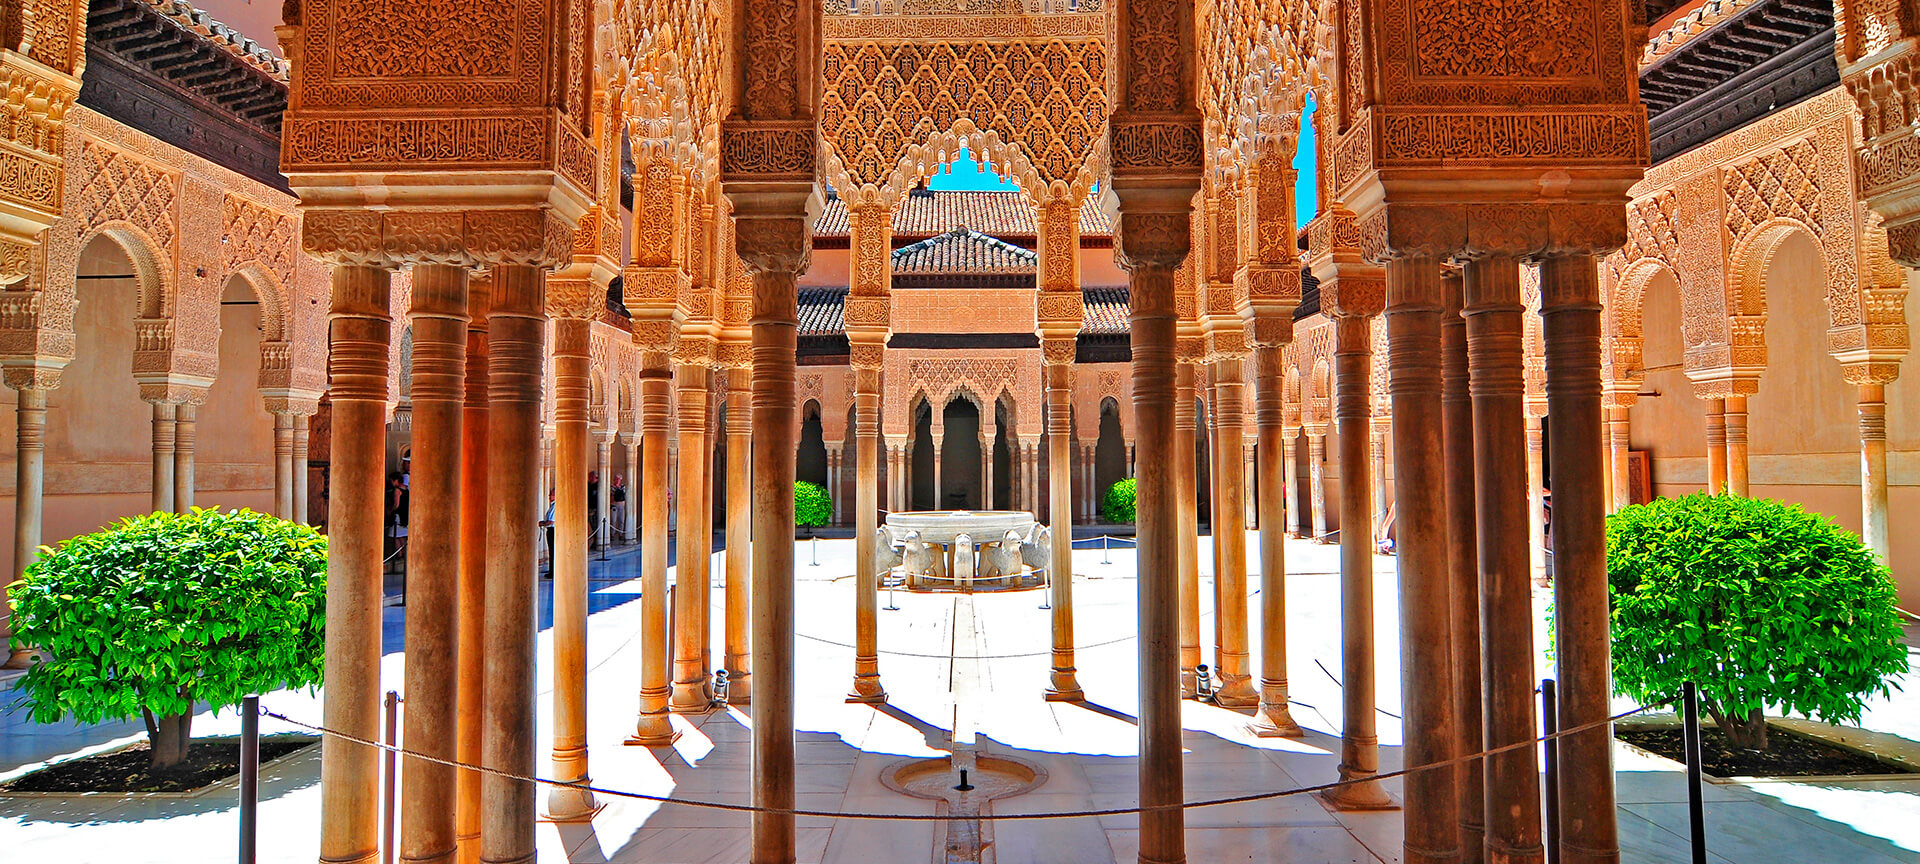 Recommendations for visiting the Alhambra in Granada